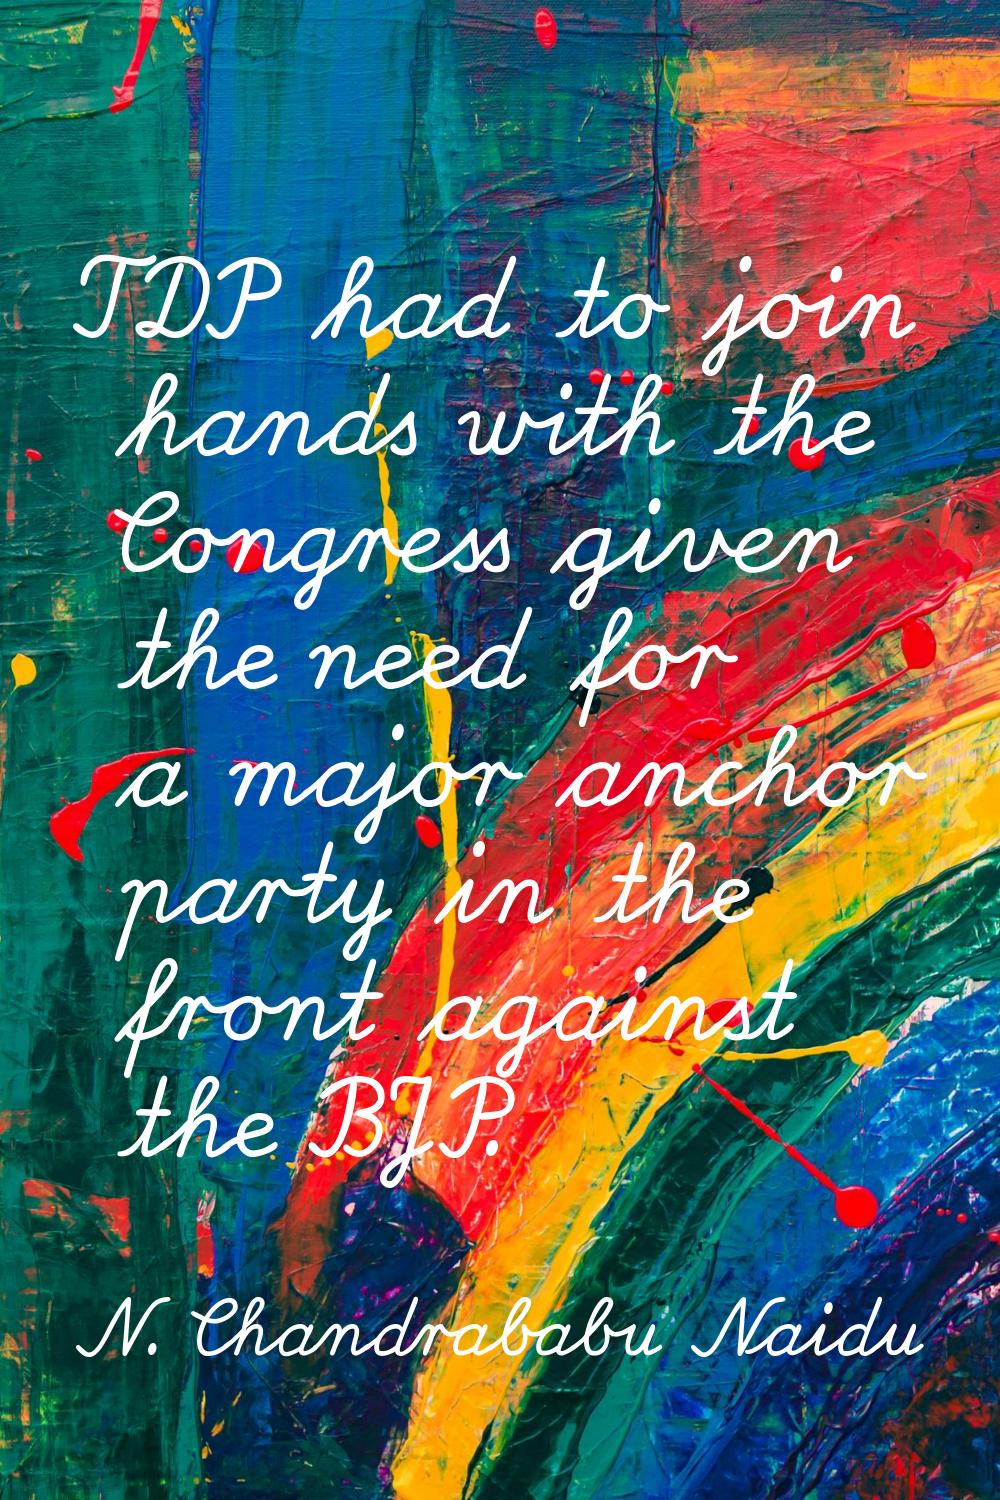 TDP had to join hands with the Congress given the need for a major anchor party in the front agains